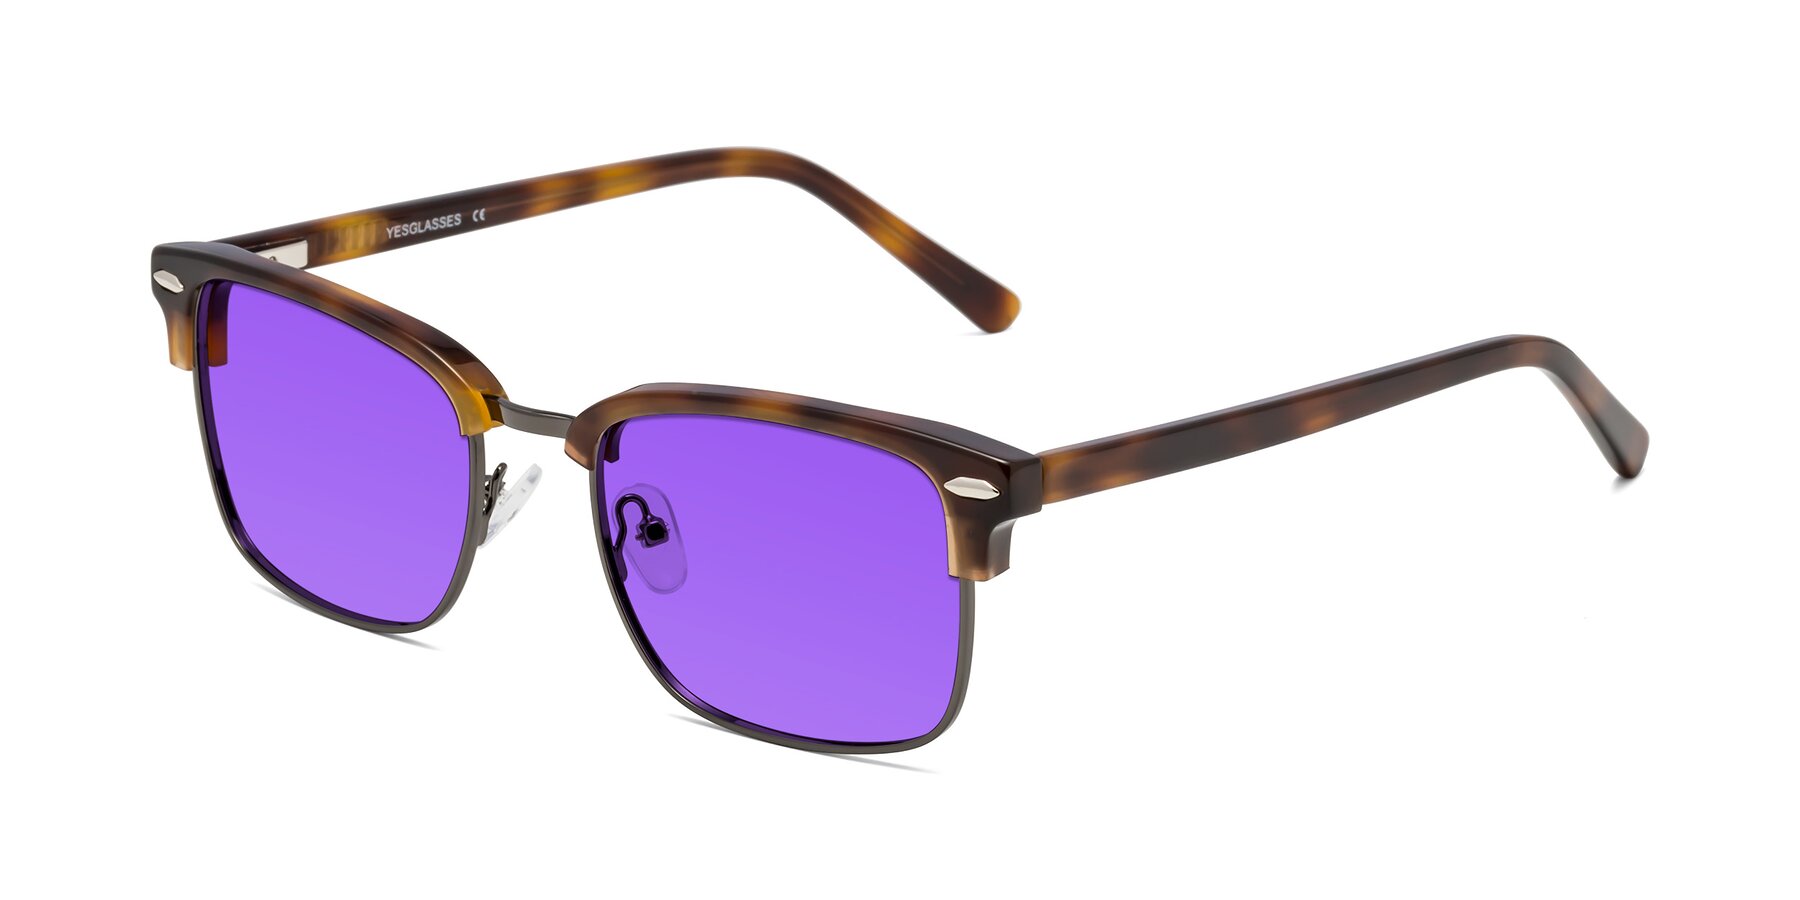 Angle of 17464 in Tortoise/ Gunmetal with Purple Tinted Lenses